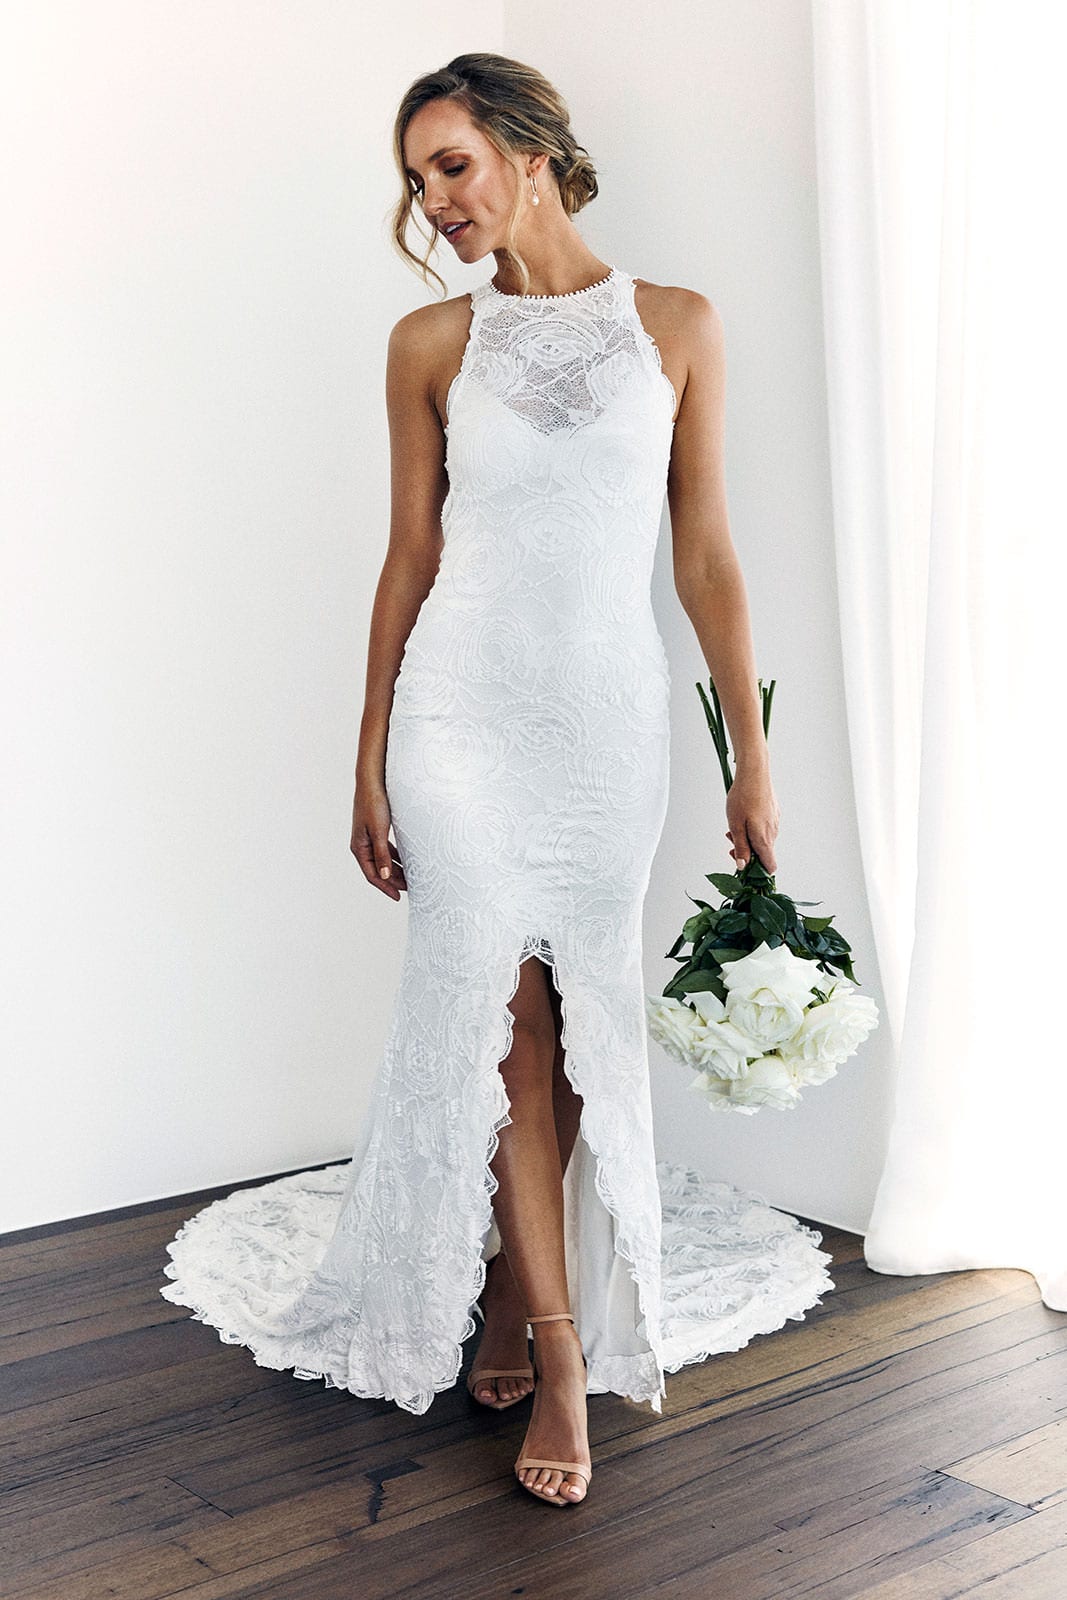 Alexandra Rose Gown | Lace Wedding Dress | Made to Order Standard 